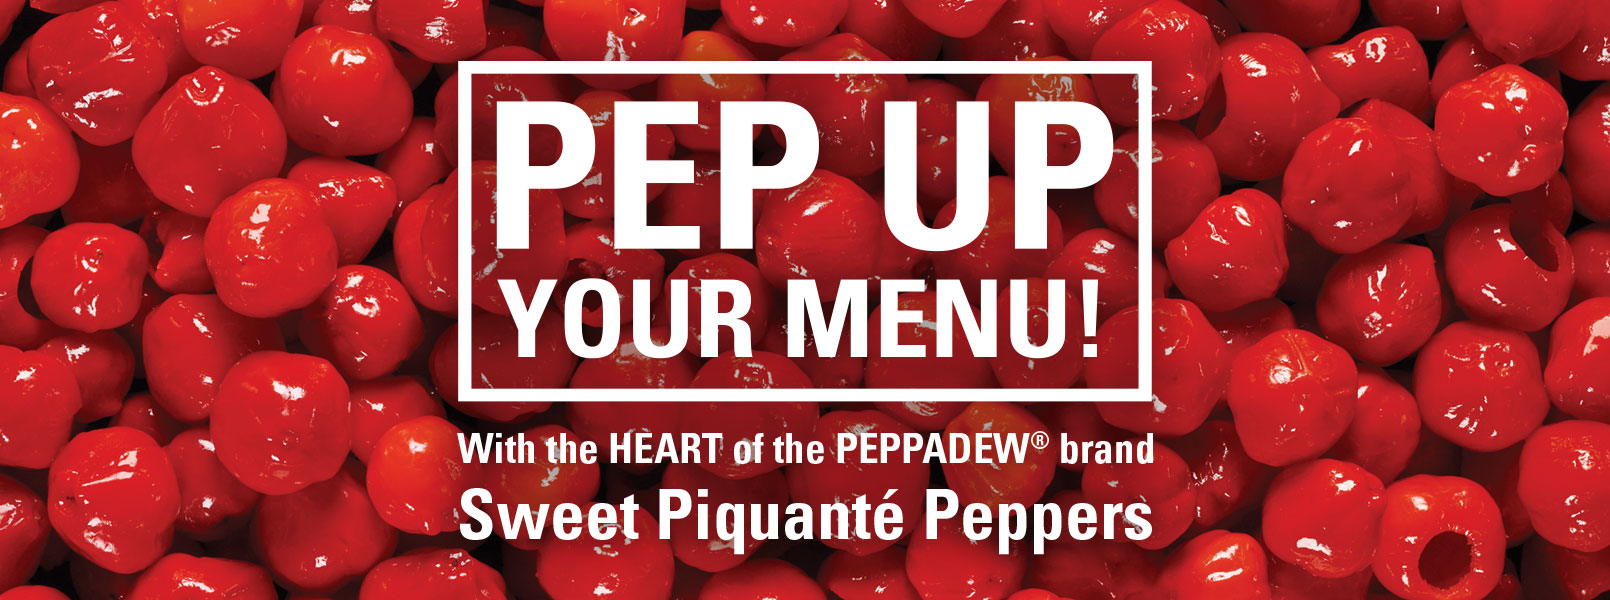 PEP UP Your Menu with Sweet Piquanté Peppers